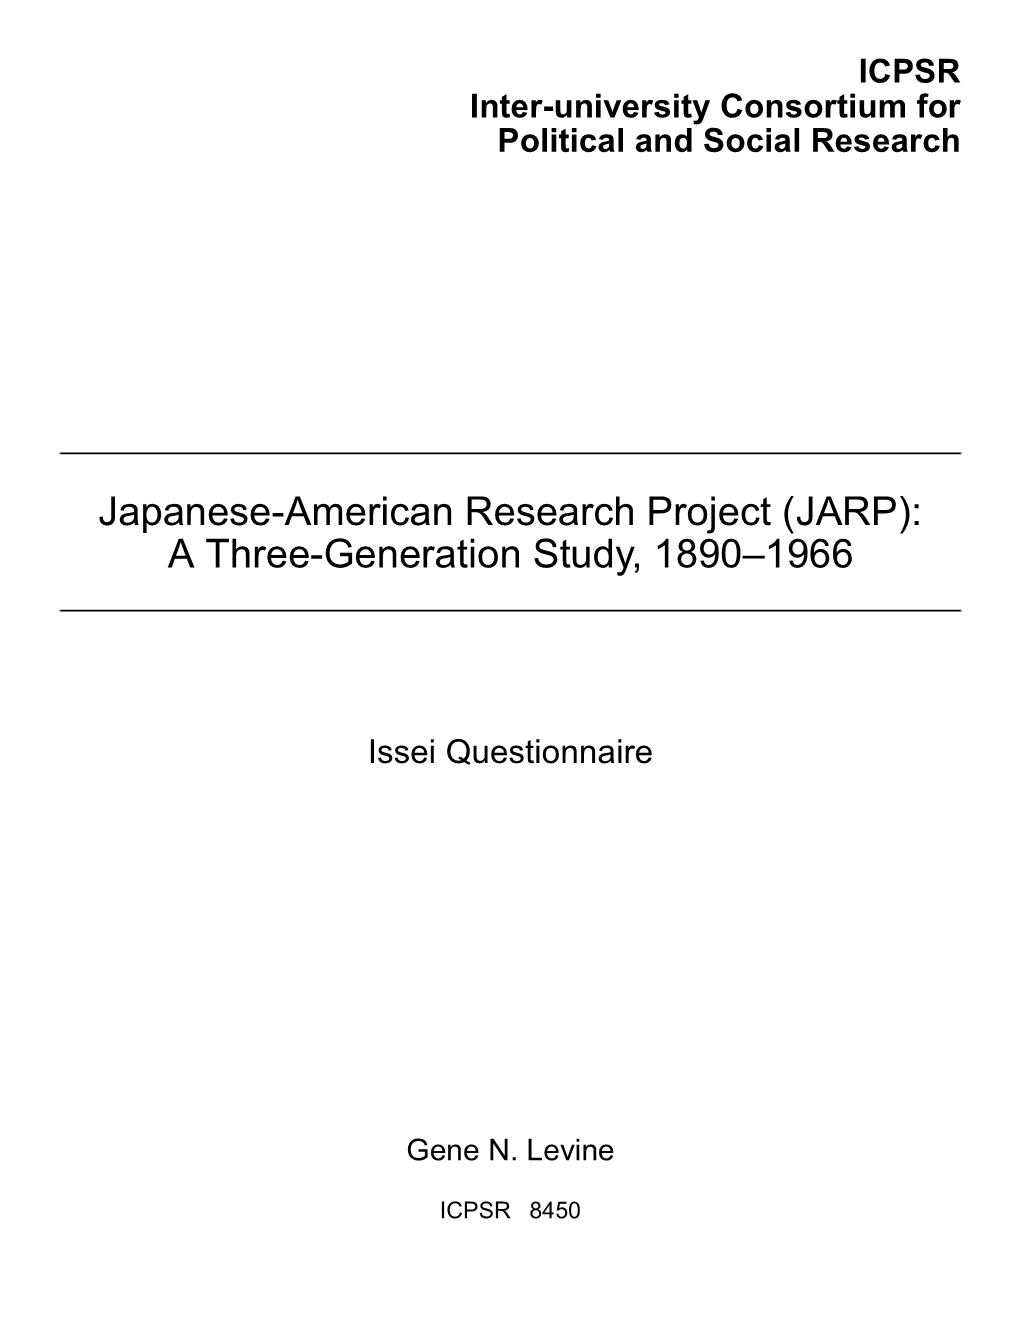 Japanese-American Research Project (JARP): a Three-Generation Study, 1890–1966